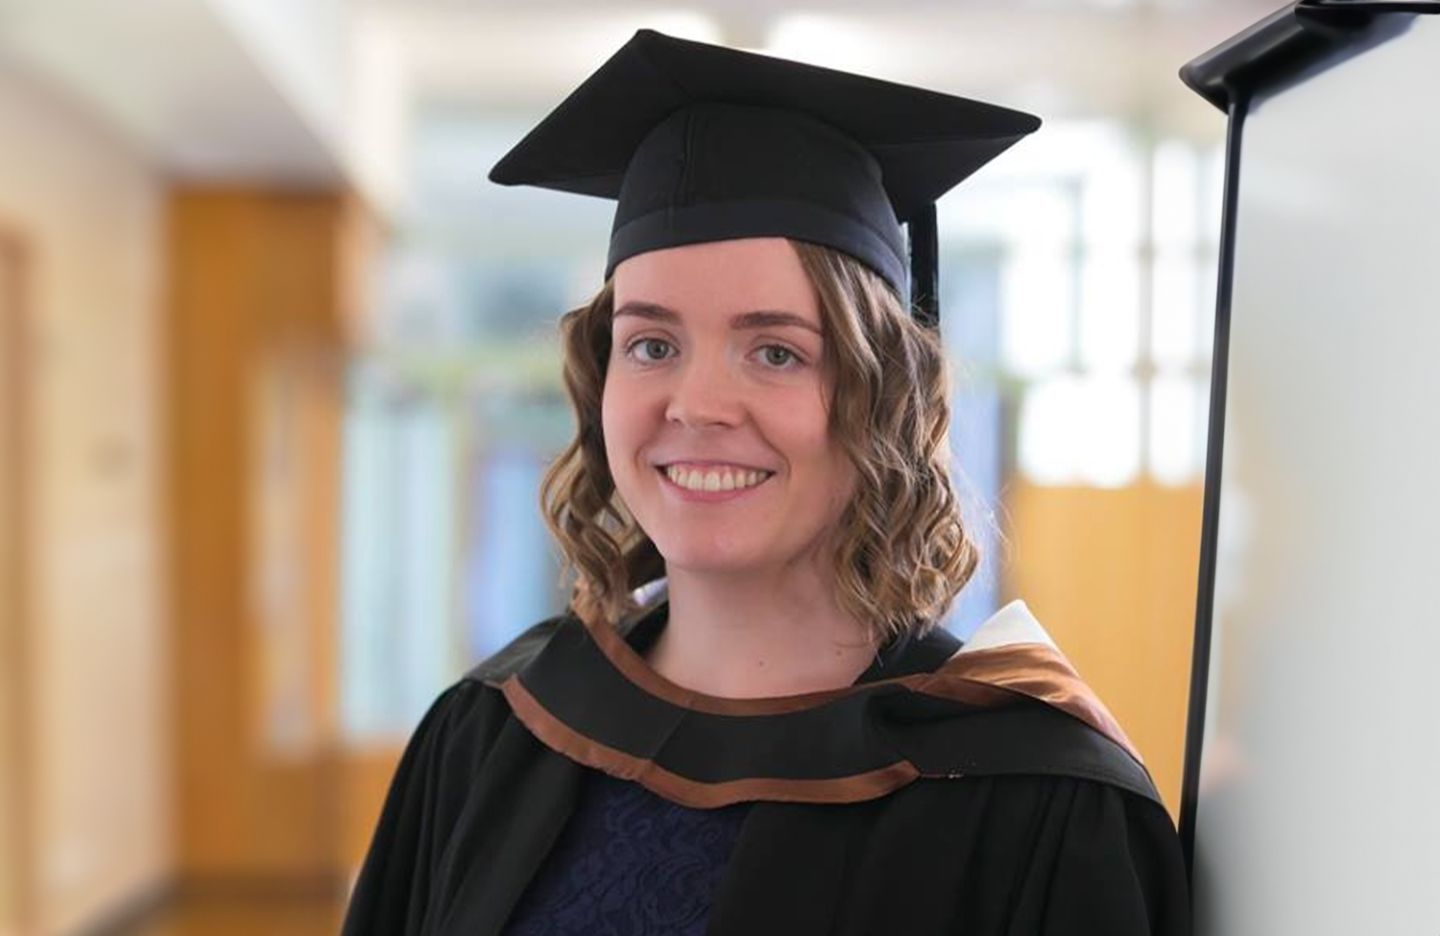 Erasmus led to clinical psychology masters in the Netherlands for SETU graduate Daisy